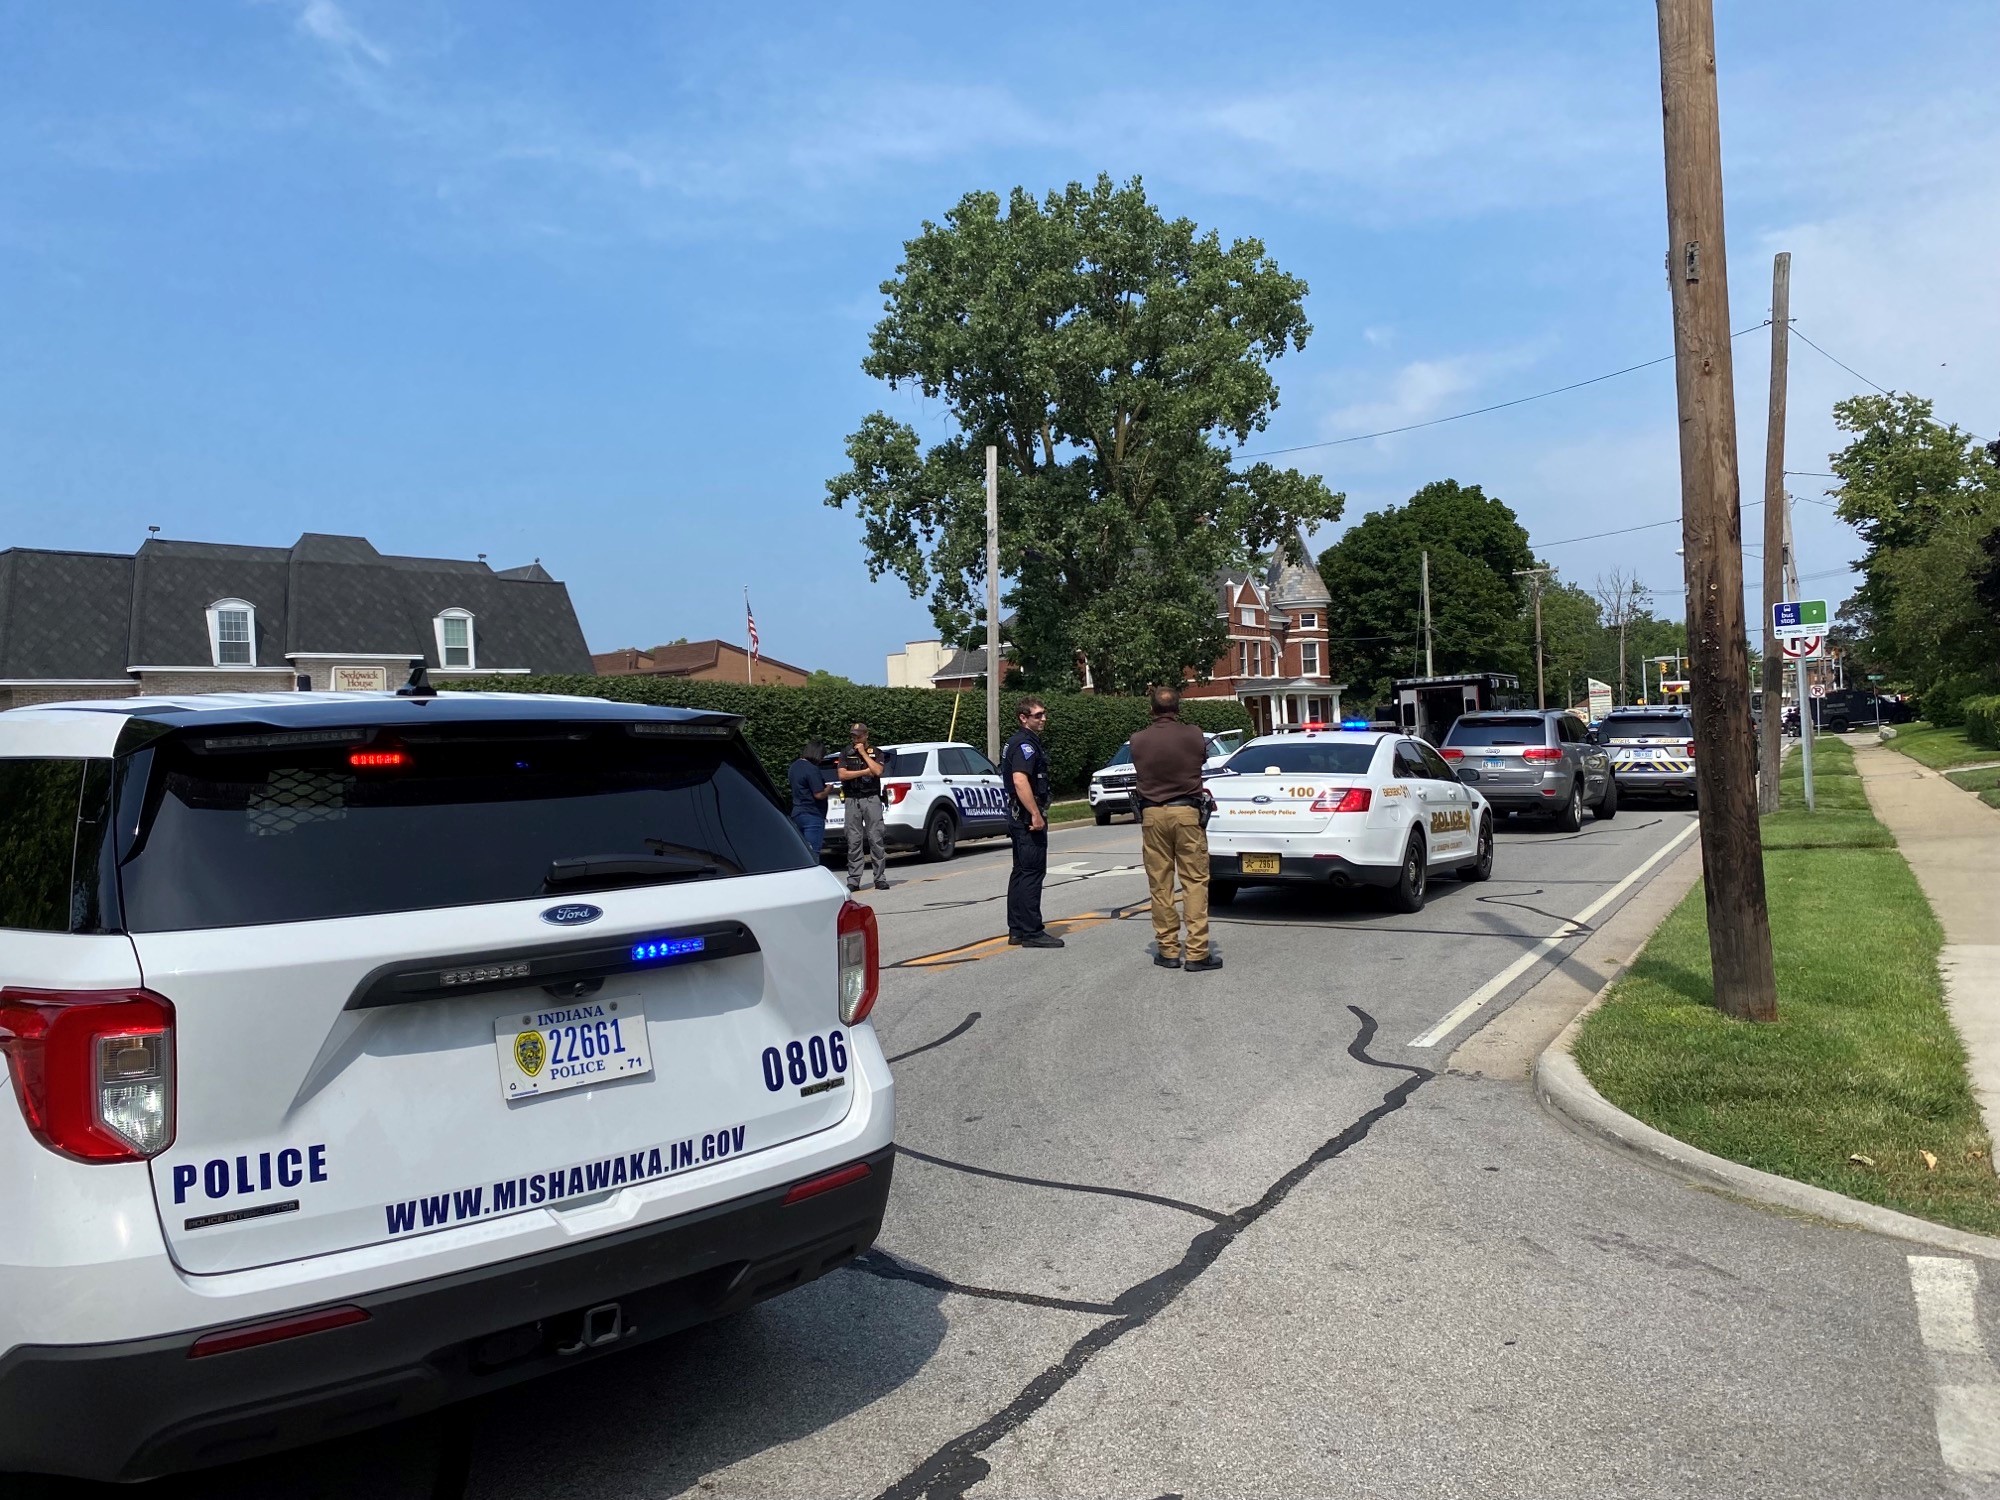 SWAT situation in Mishawaka doesn't surprise neighbors, home had